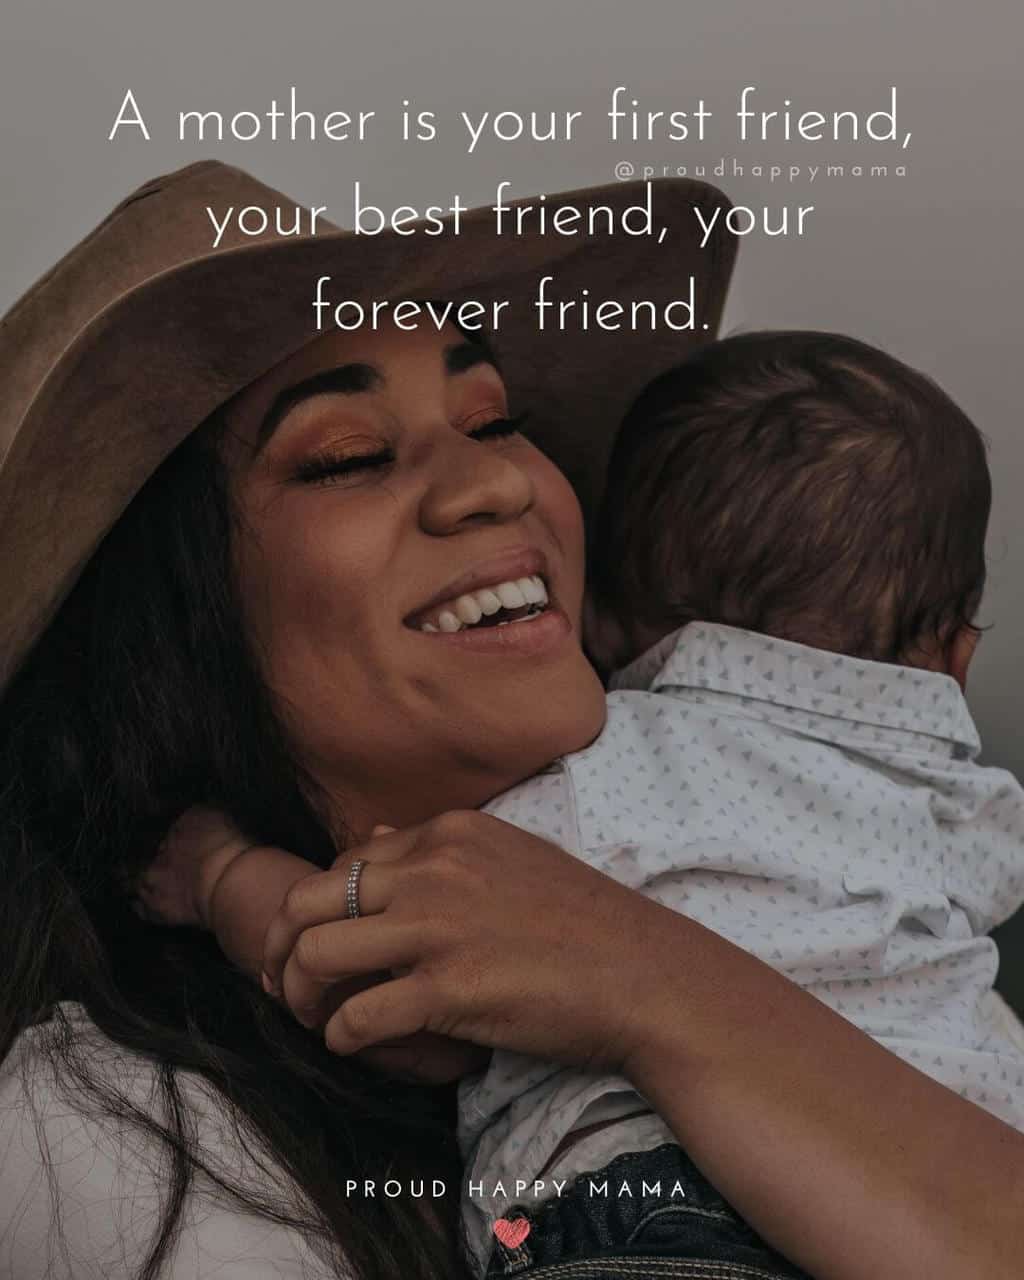 Boy Mom Quotes | A mother is your first friend, your best friend, your forever friend.